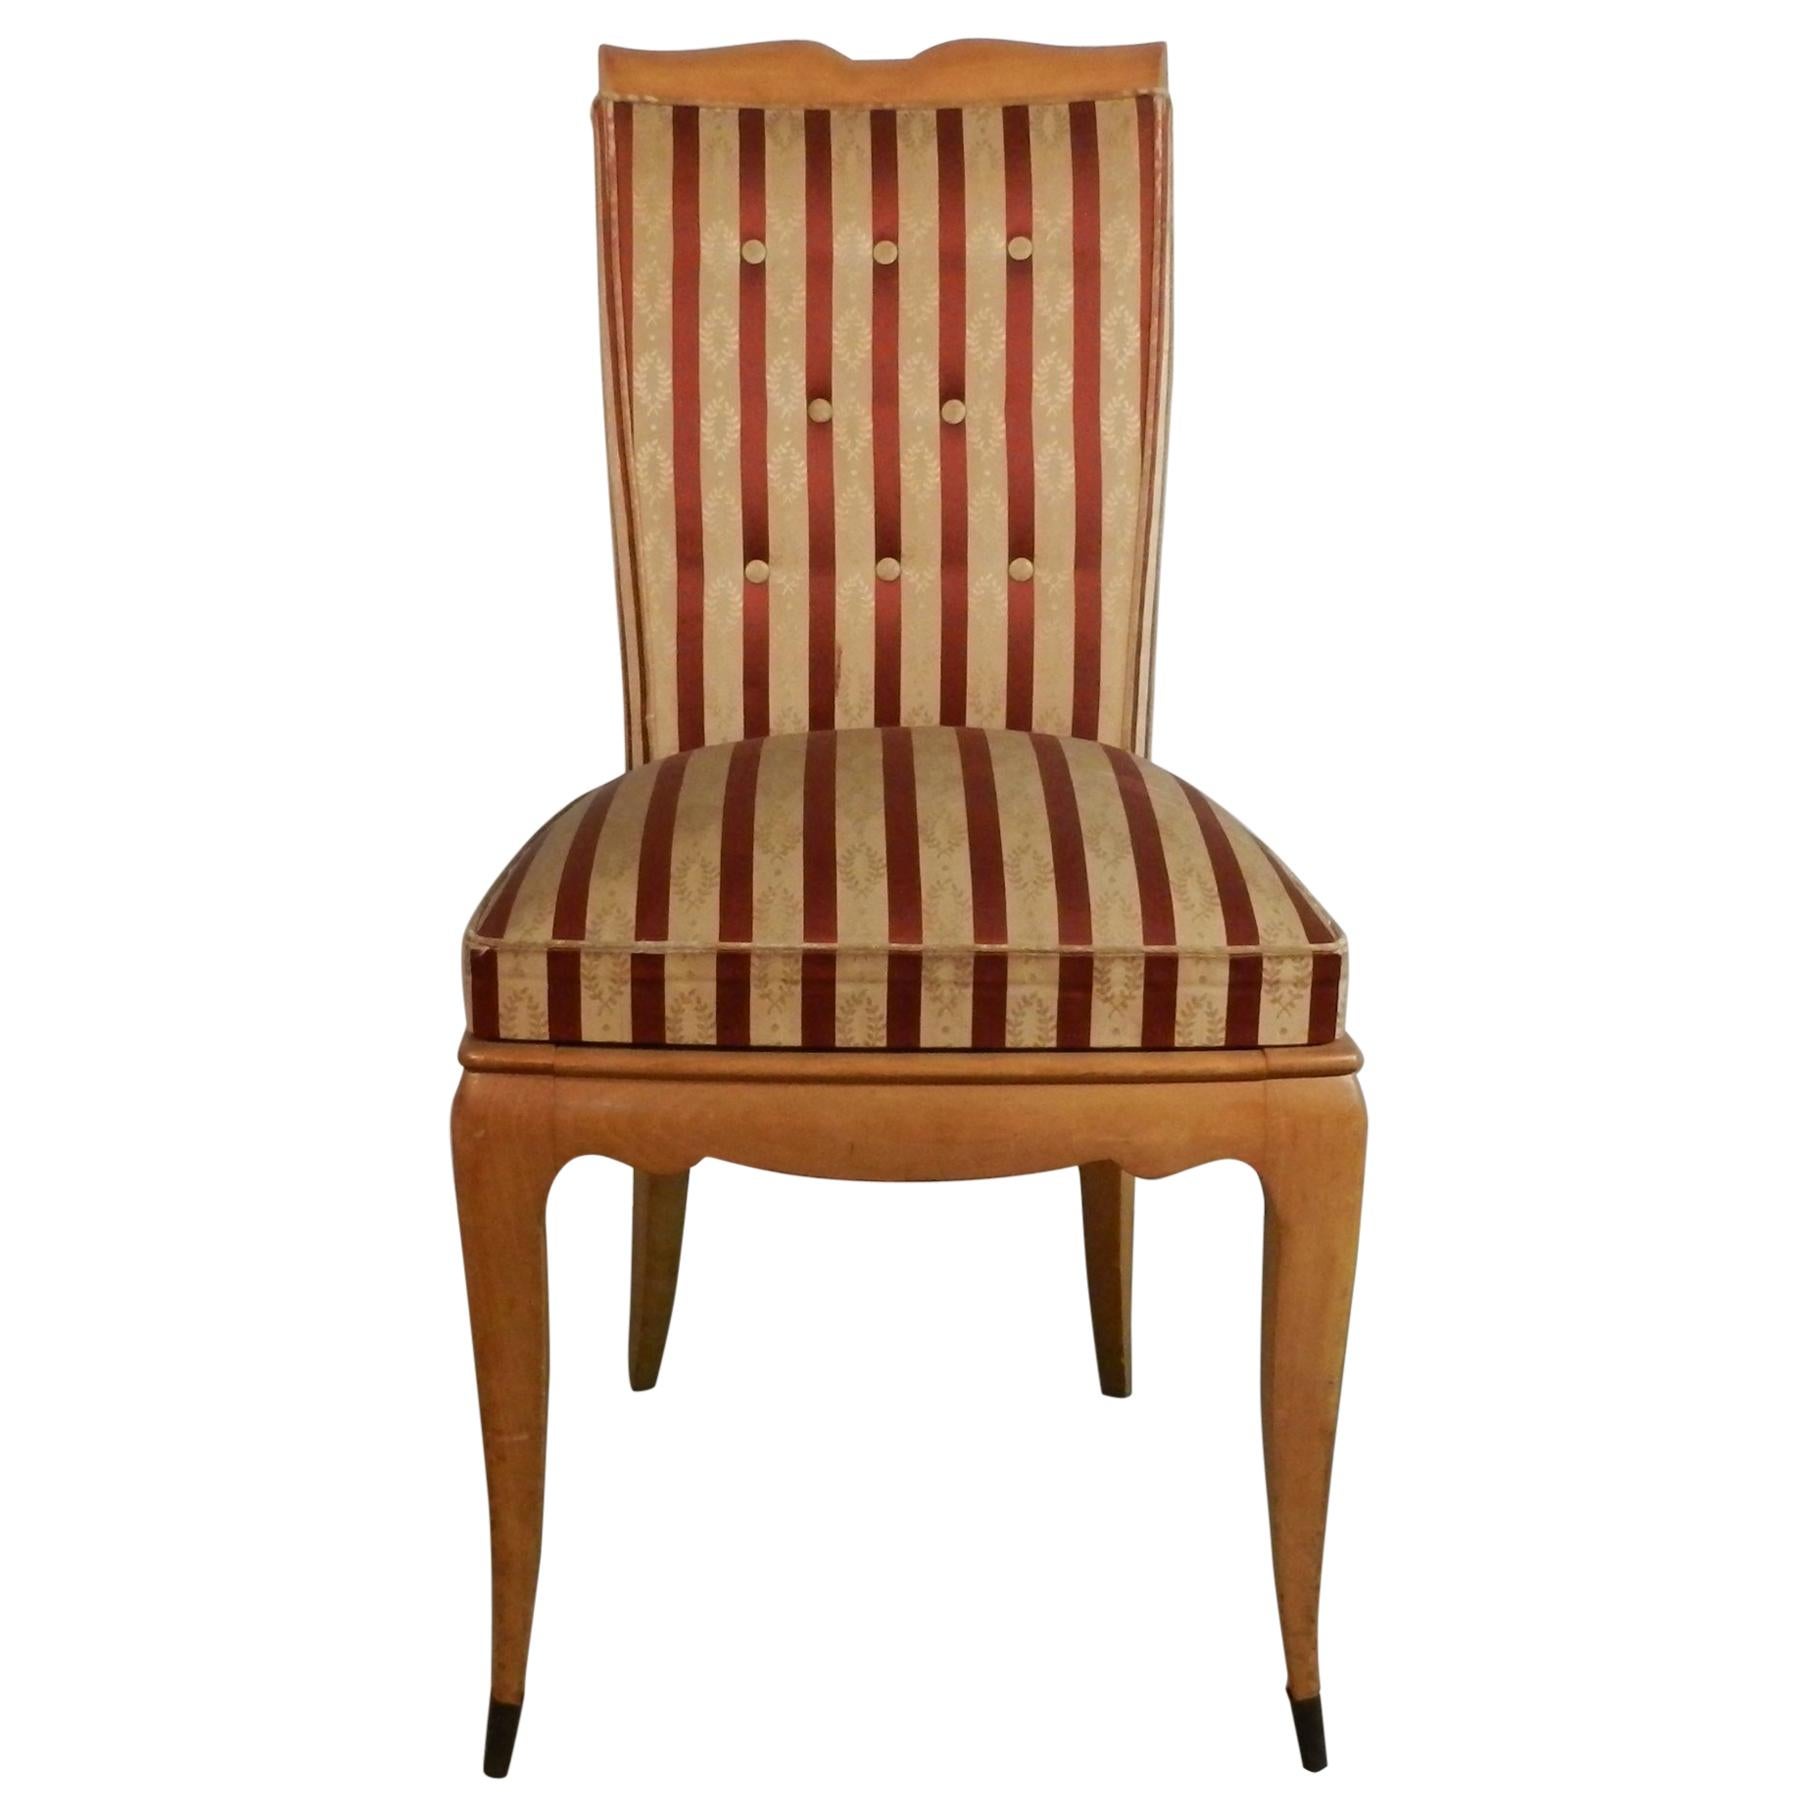 Elegant Art Deco Chair in Sycamore in the Style of René Prou